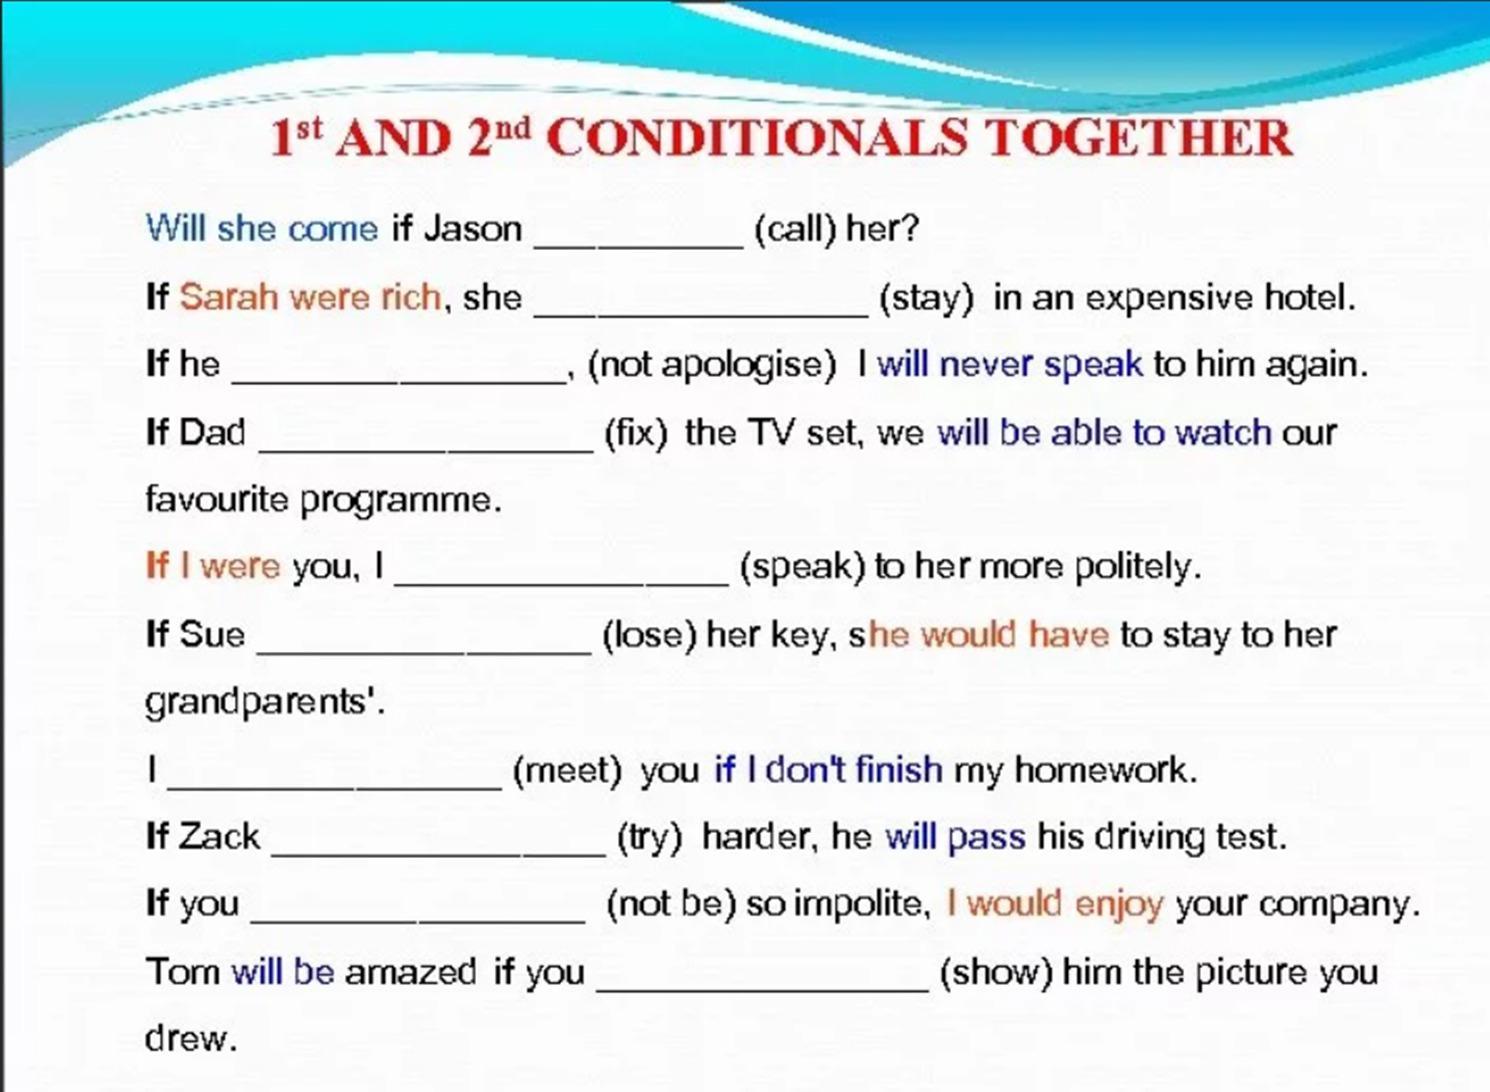 Second на английском. Английский 1st 2nd conditional. 1st and 2nd conditionals упражнения. First and second conditional упражнения. Zero first and second conditionals упражнения.